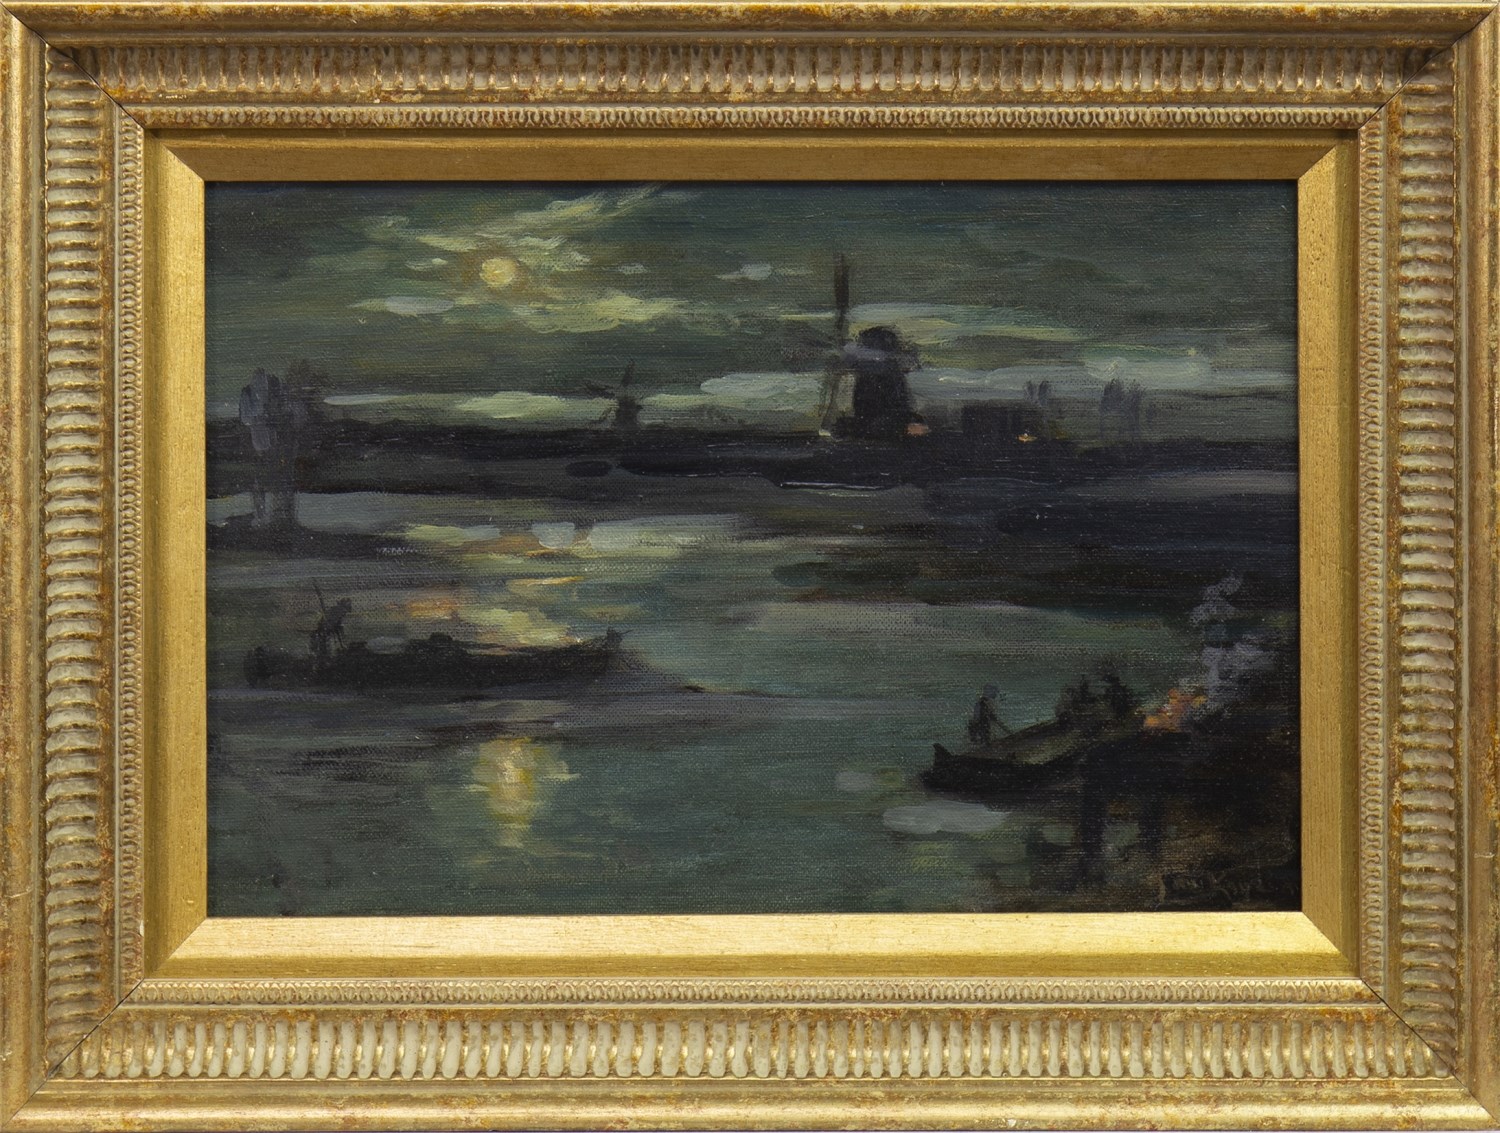 CONTINENTAL RIVER SCENE, AN OIL BY JAMES KAY